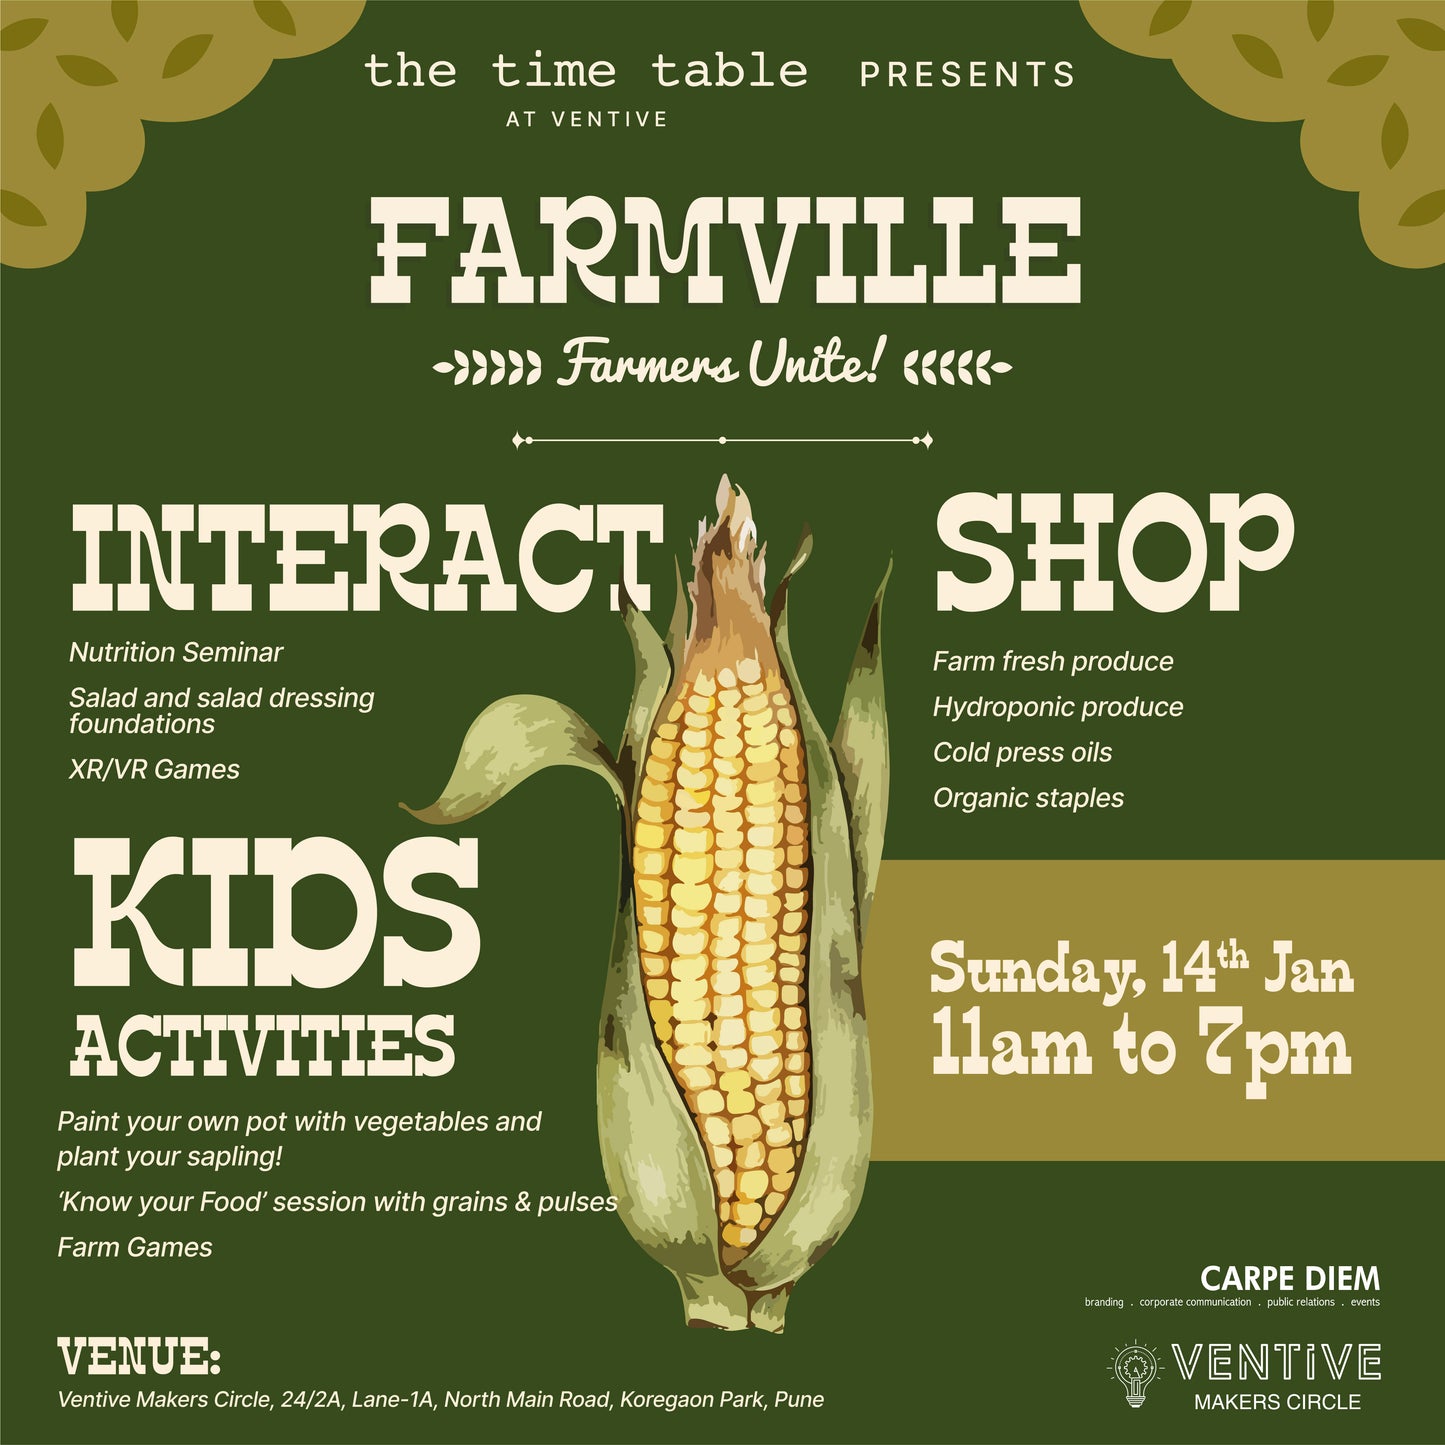 Farmville at The Time Table